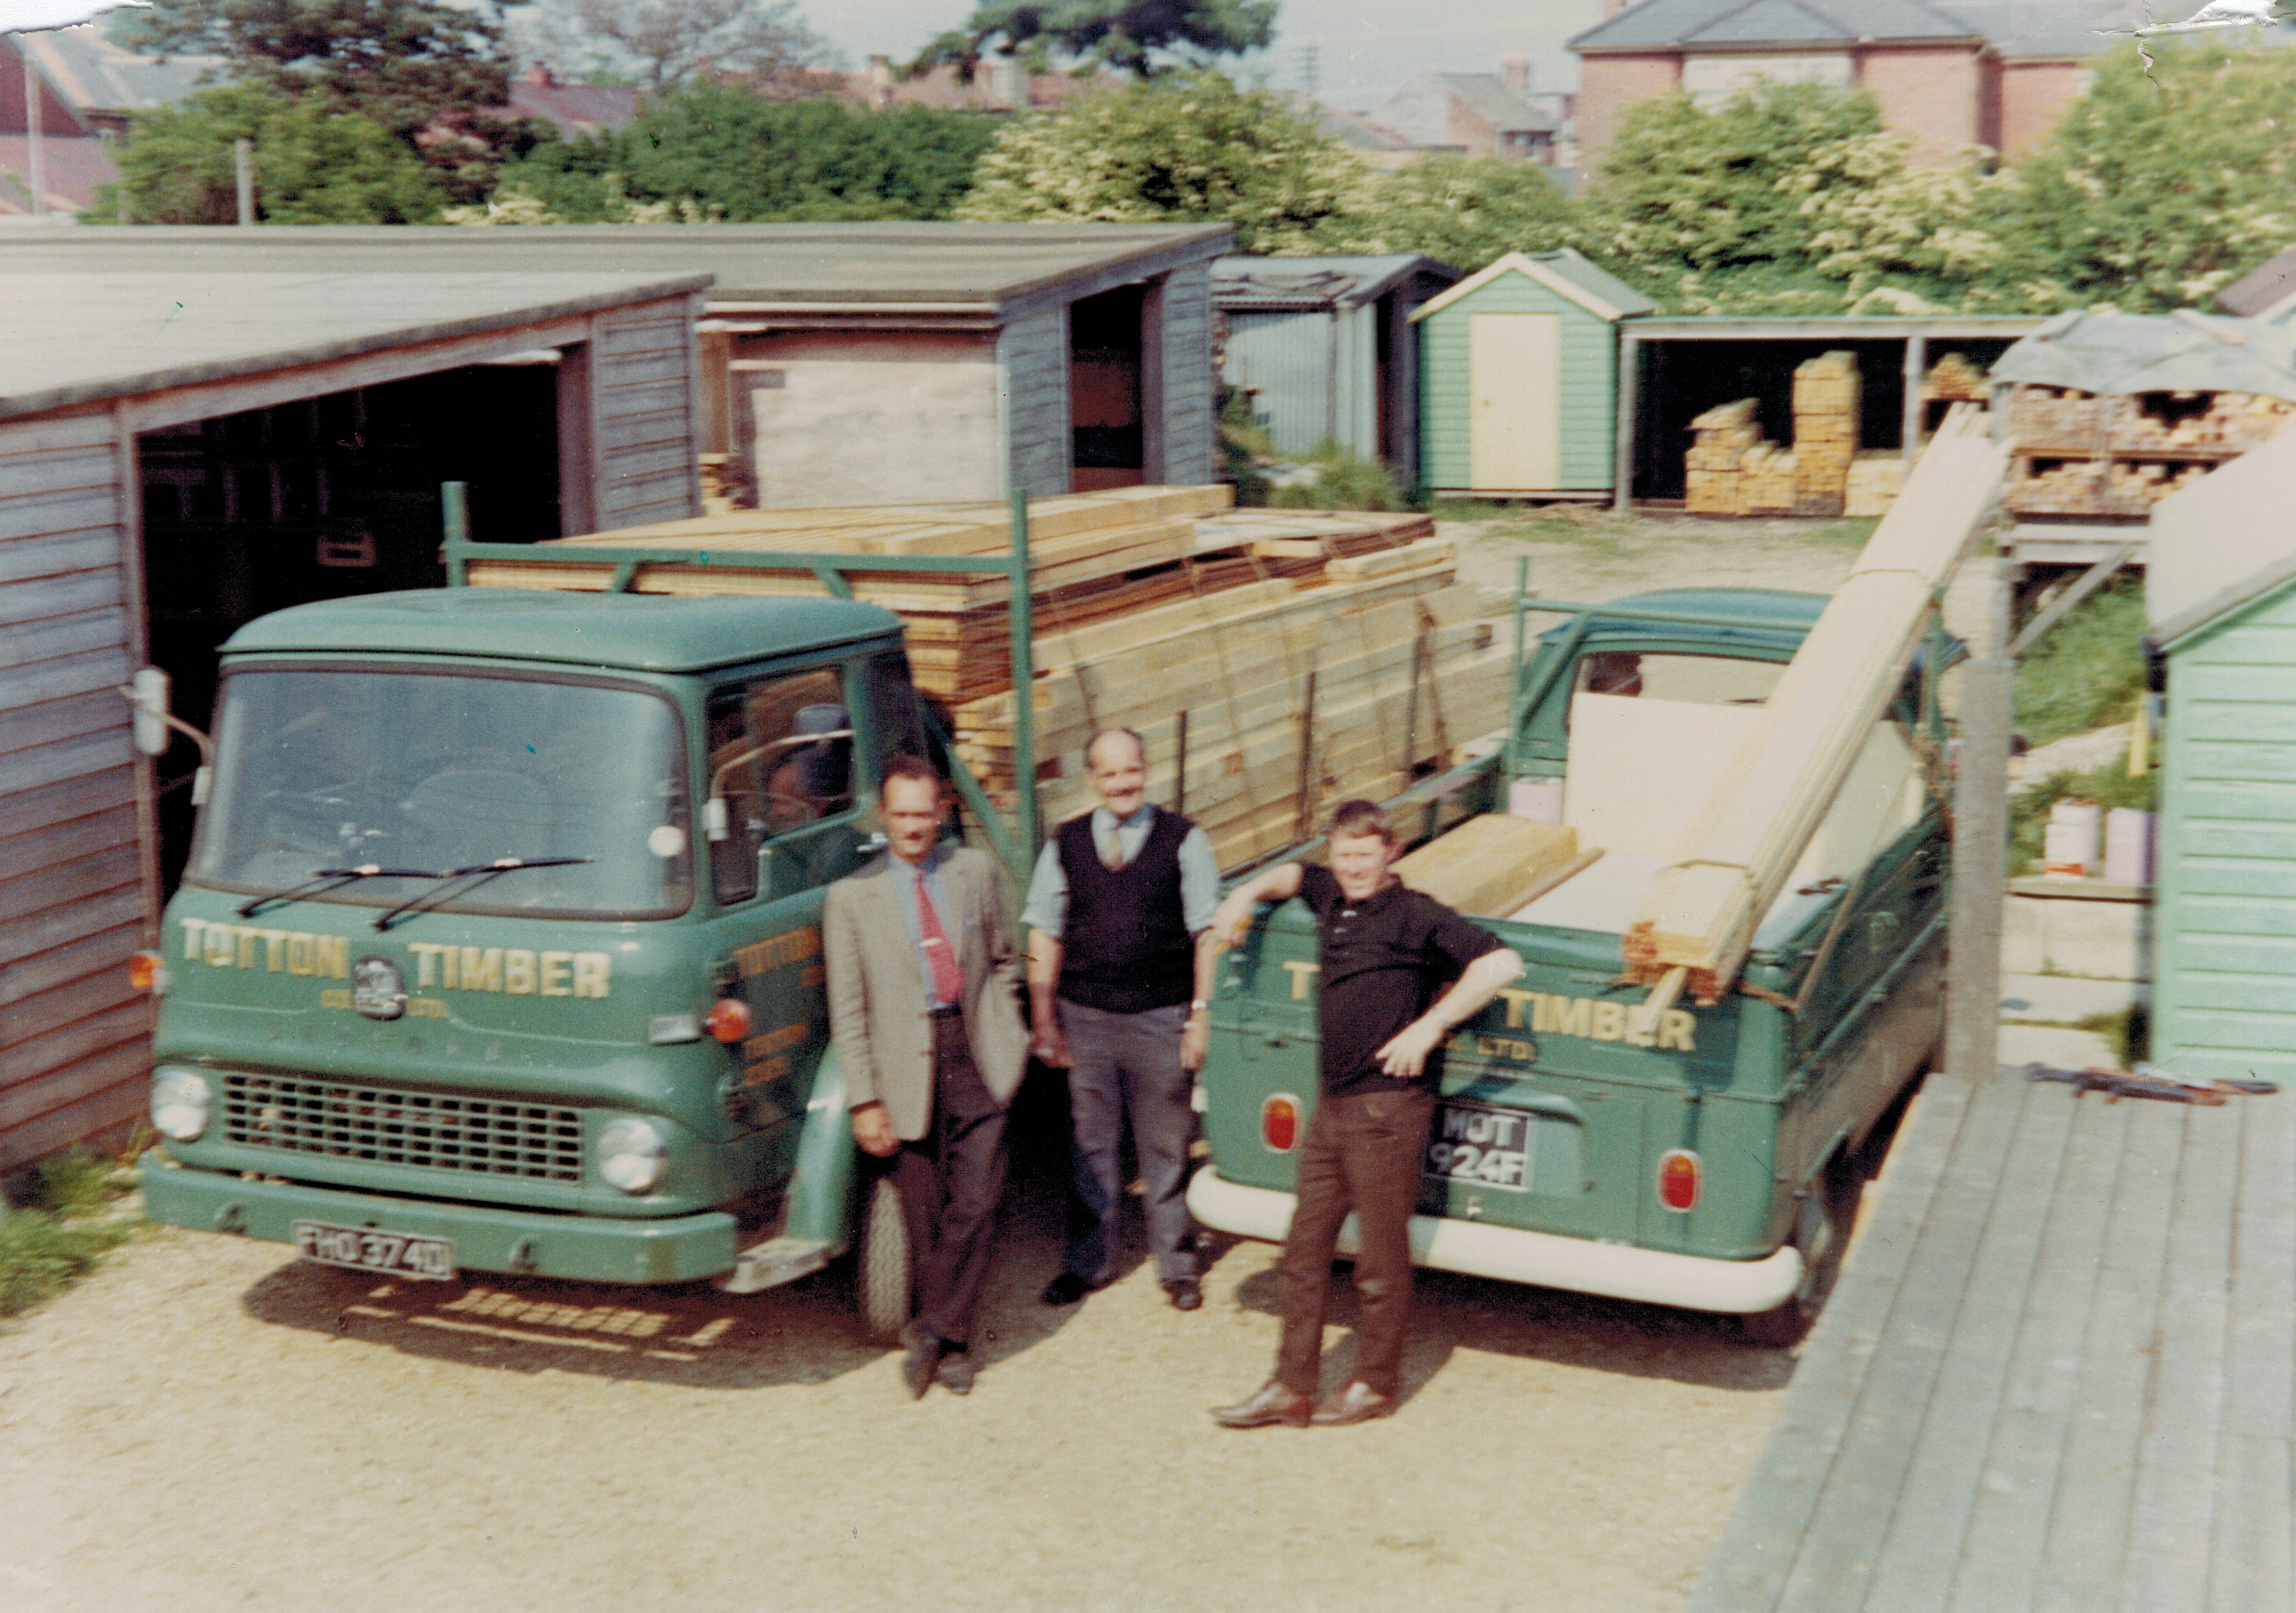 Photograph within Totton Timbers History at the year 1969